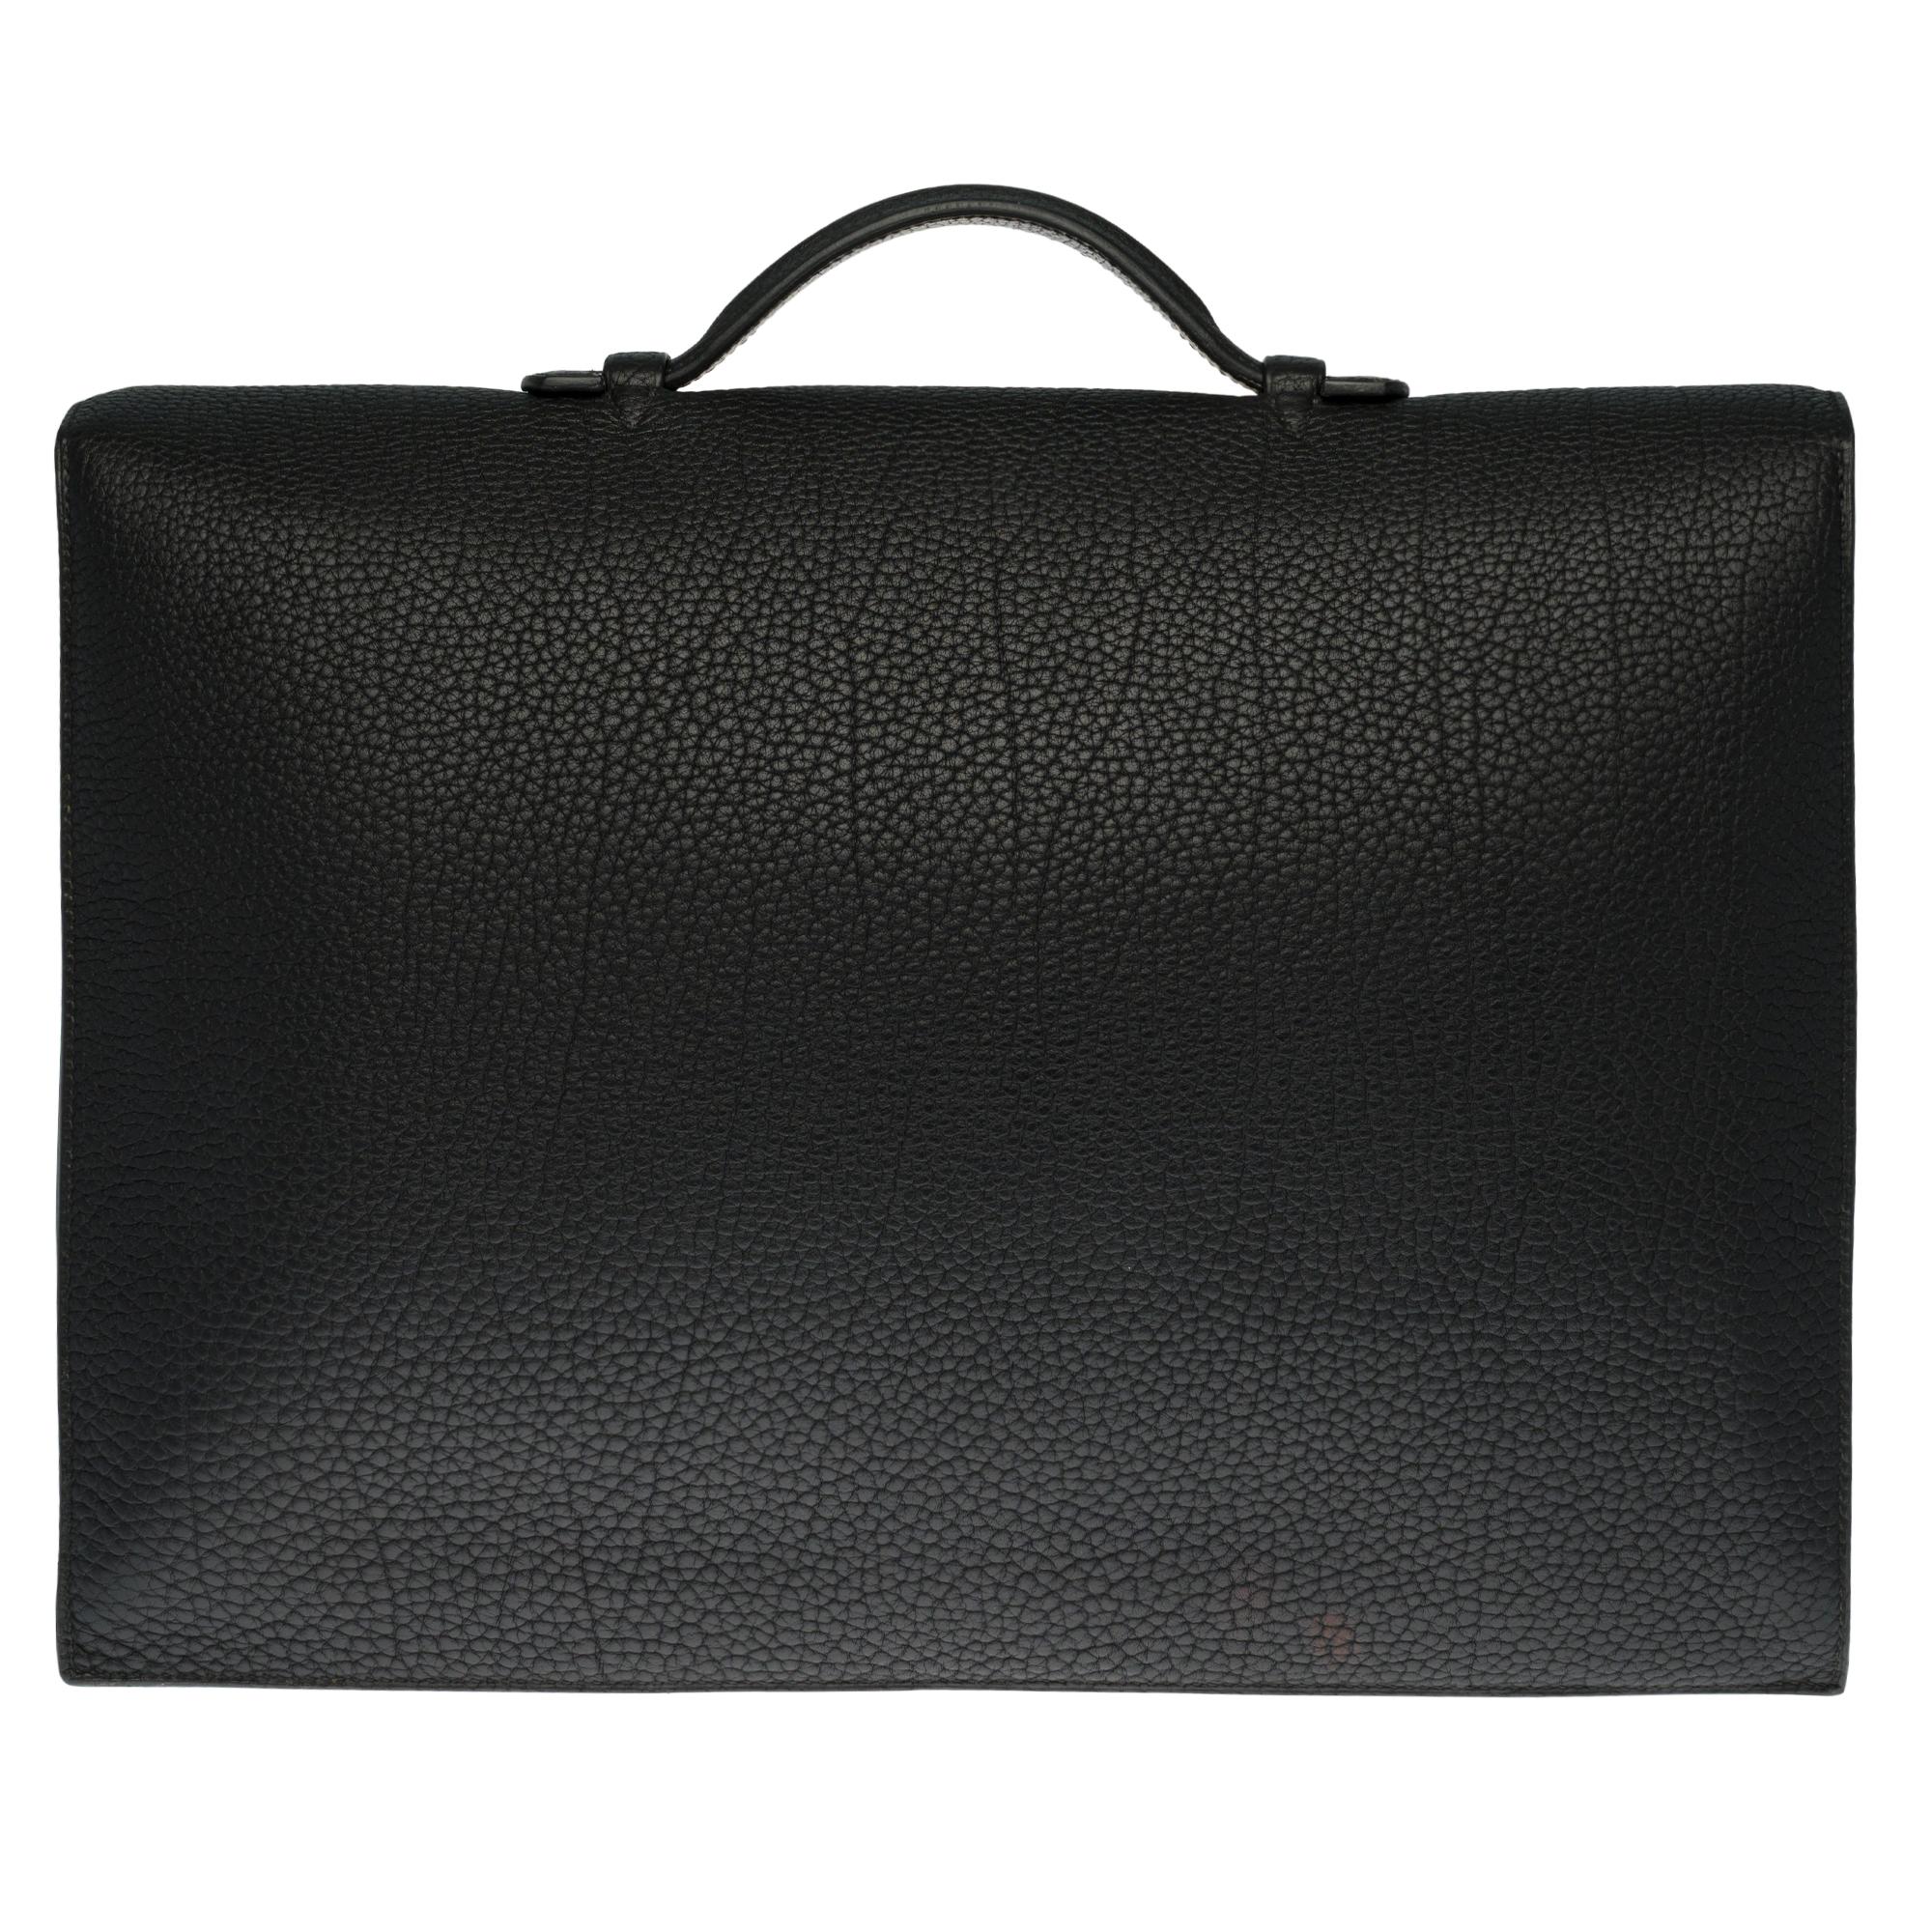 Very chic Hermès Briefcase Bag in black Fjord leather, gold-tone metal trim, simple black leather handle for a handheld.

Fastening by flip latch on flap.
Lining in black leather, 3 compartments and 2 bellows.
Signature: 